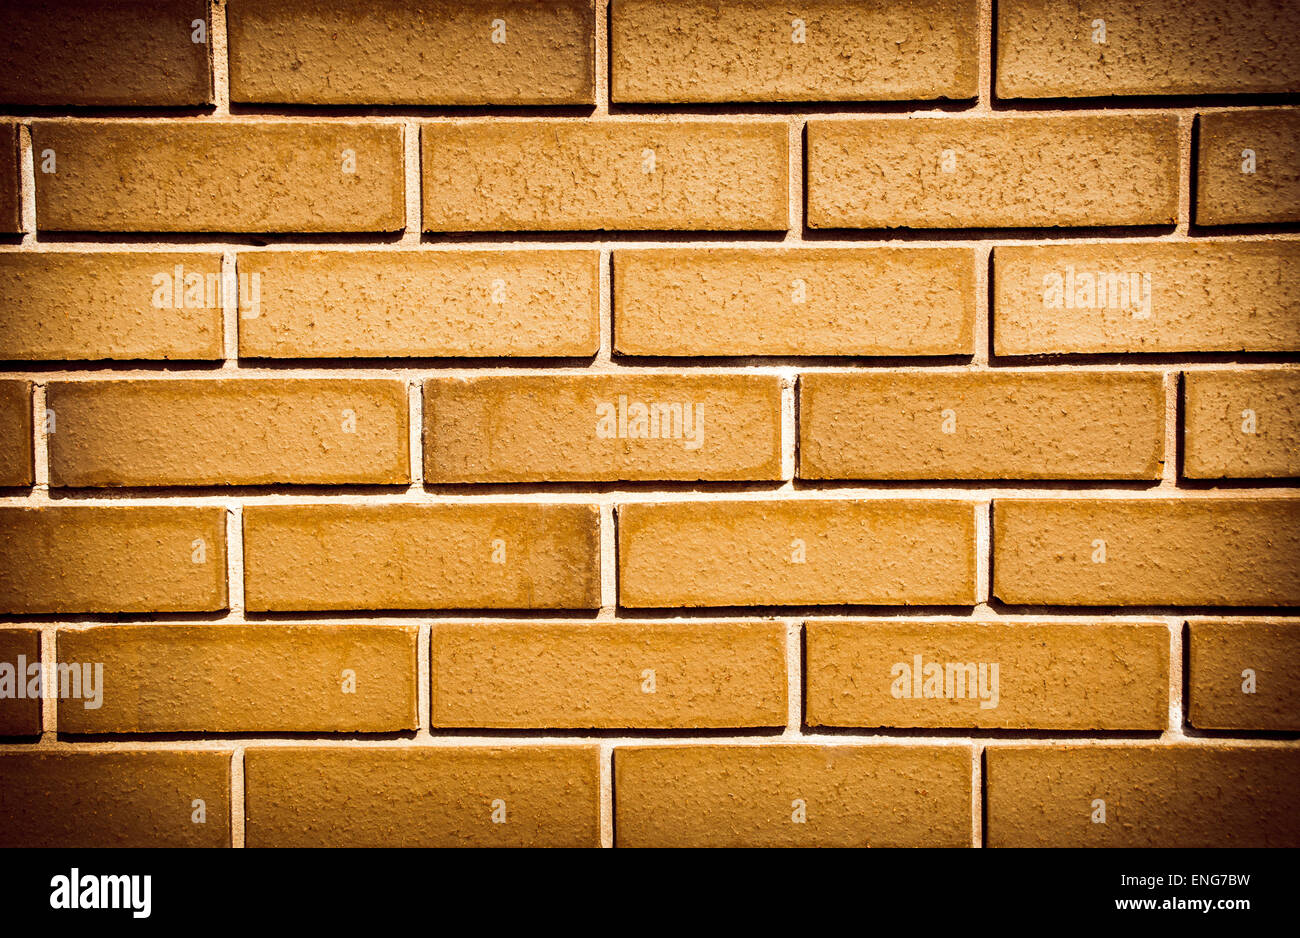 Brickwall made up of orange bricks with added saturation and vignetting Stock Photo